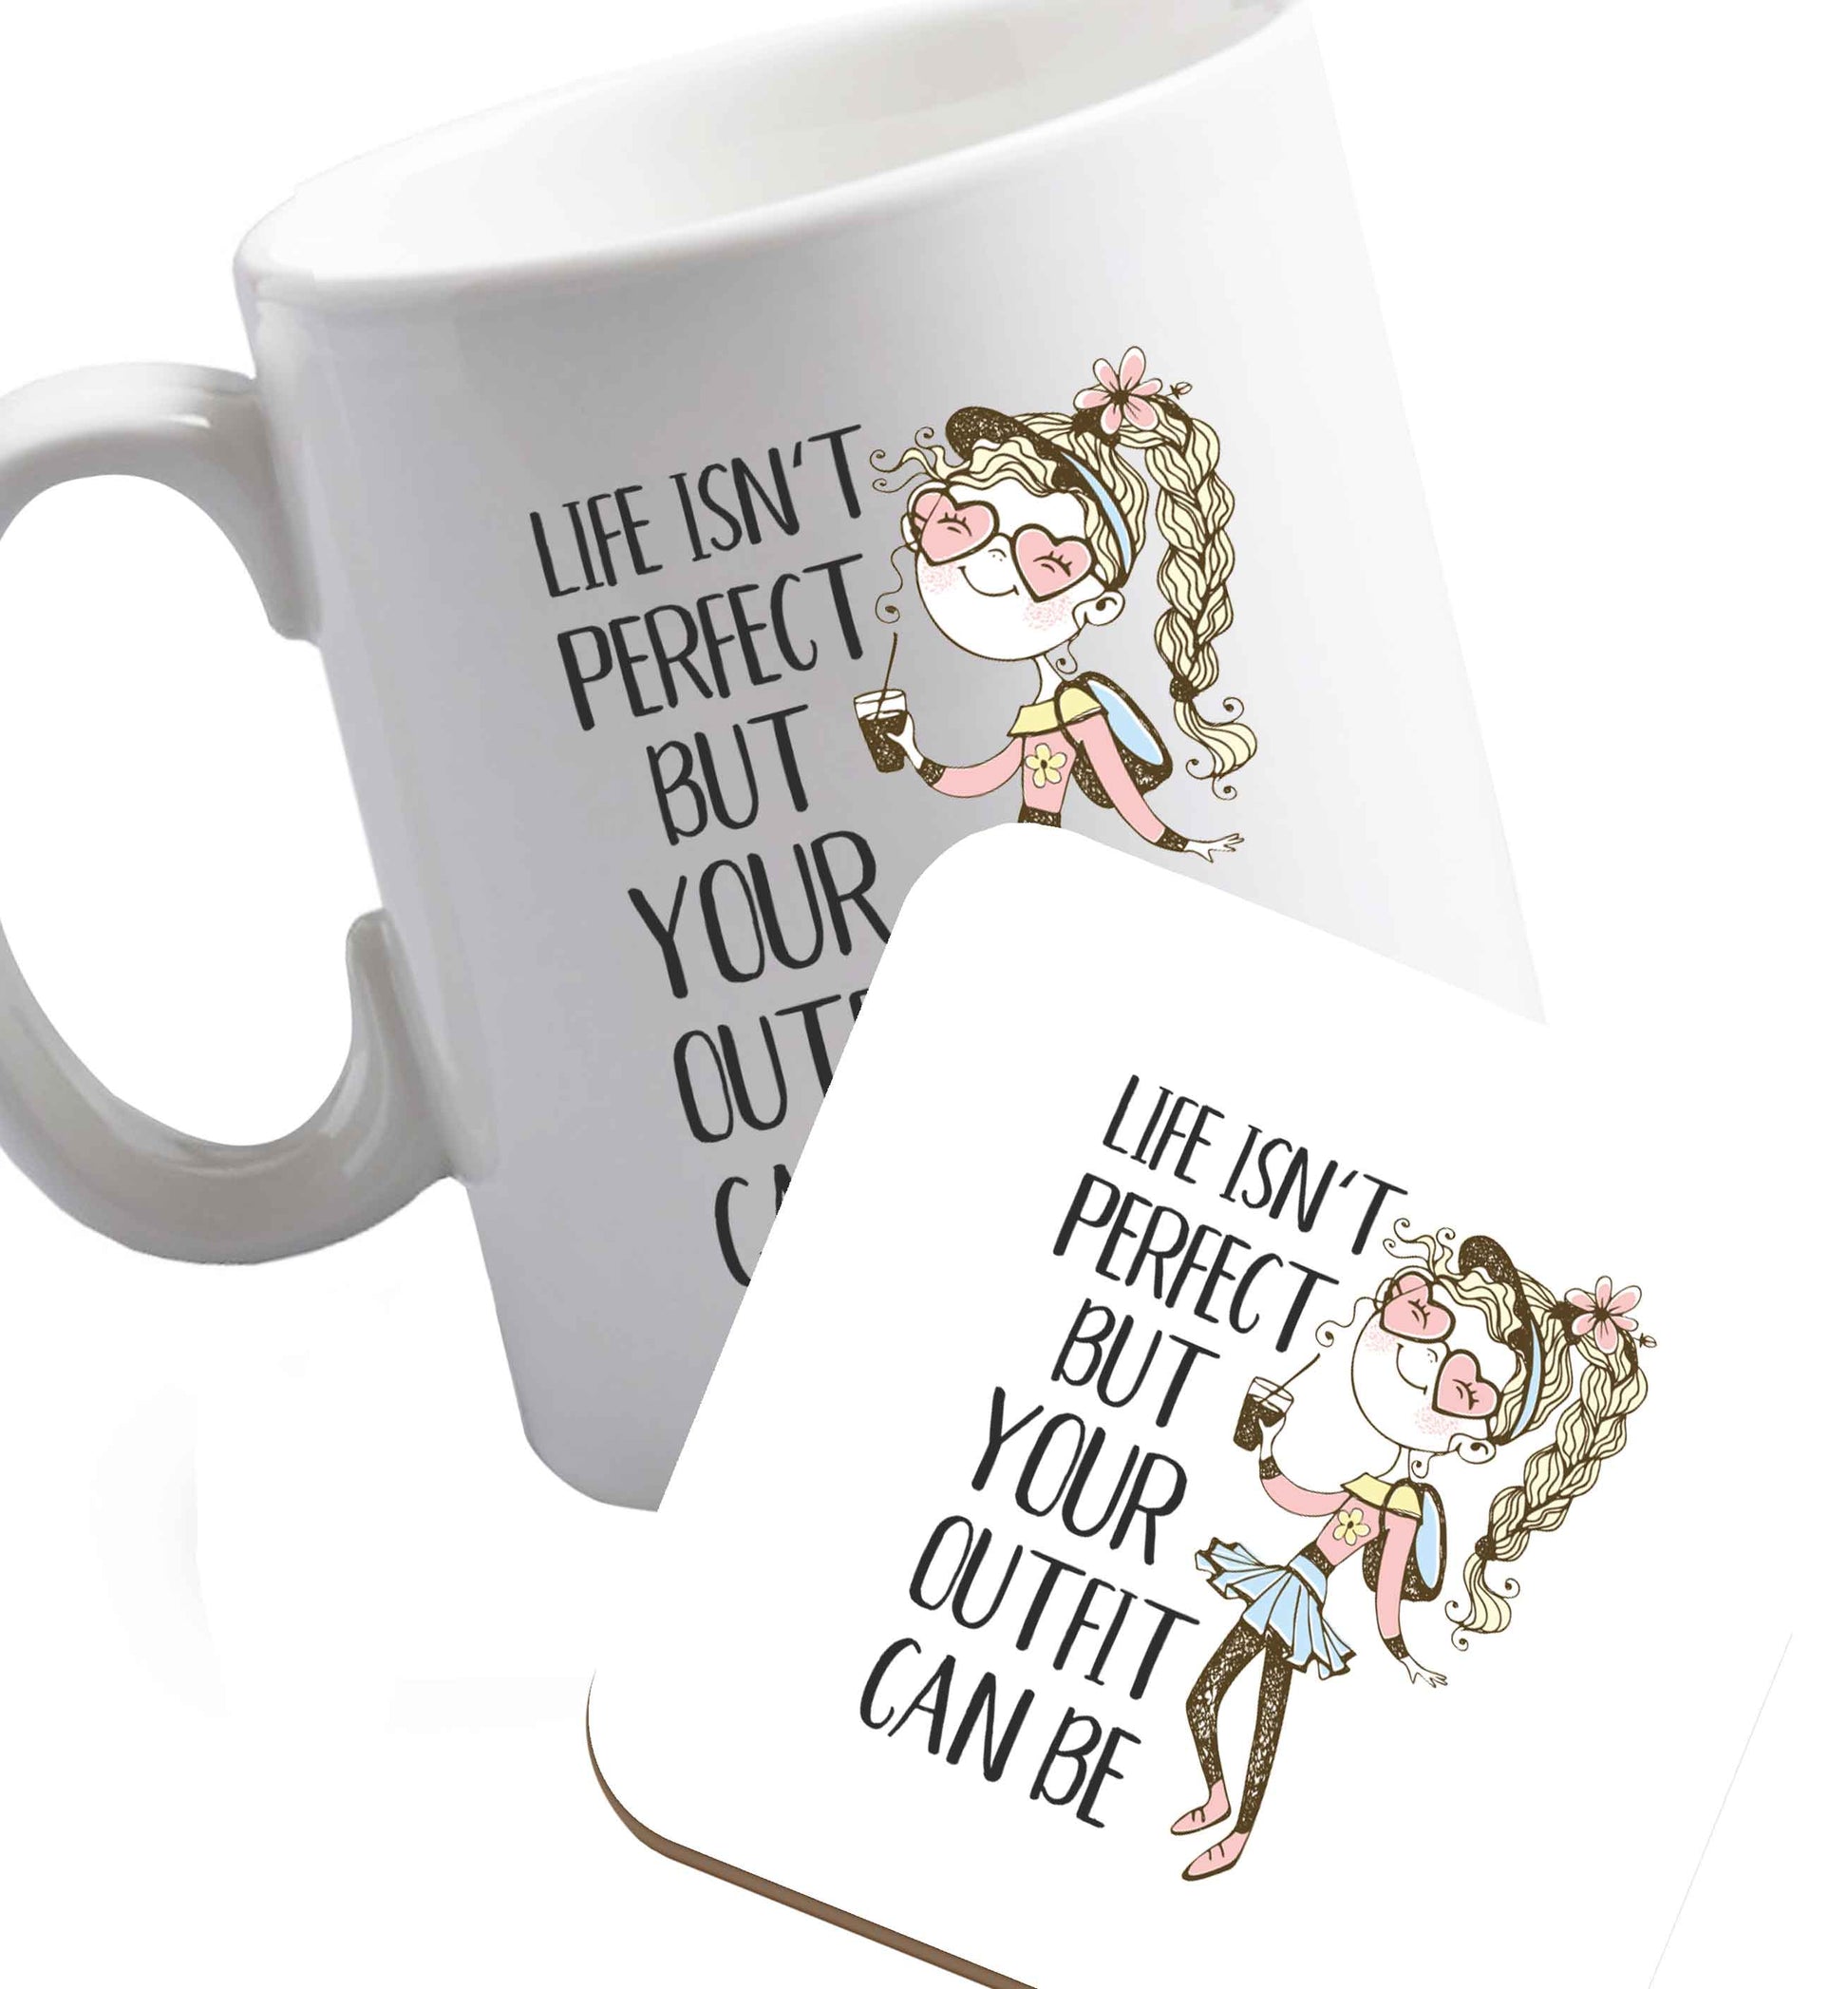 10 oz Life isn't perfect but your outfit can be illustration  ceramic mug and coaster set right handed